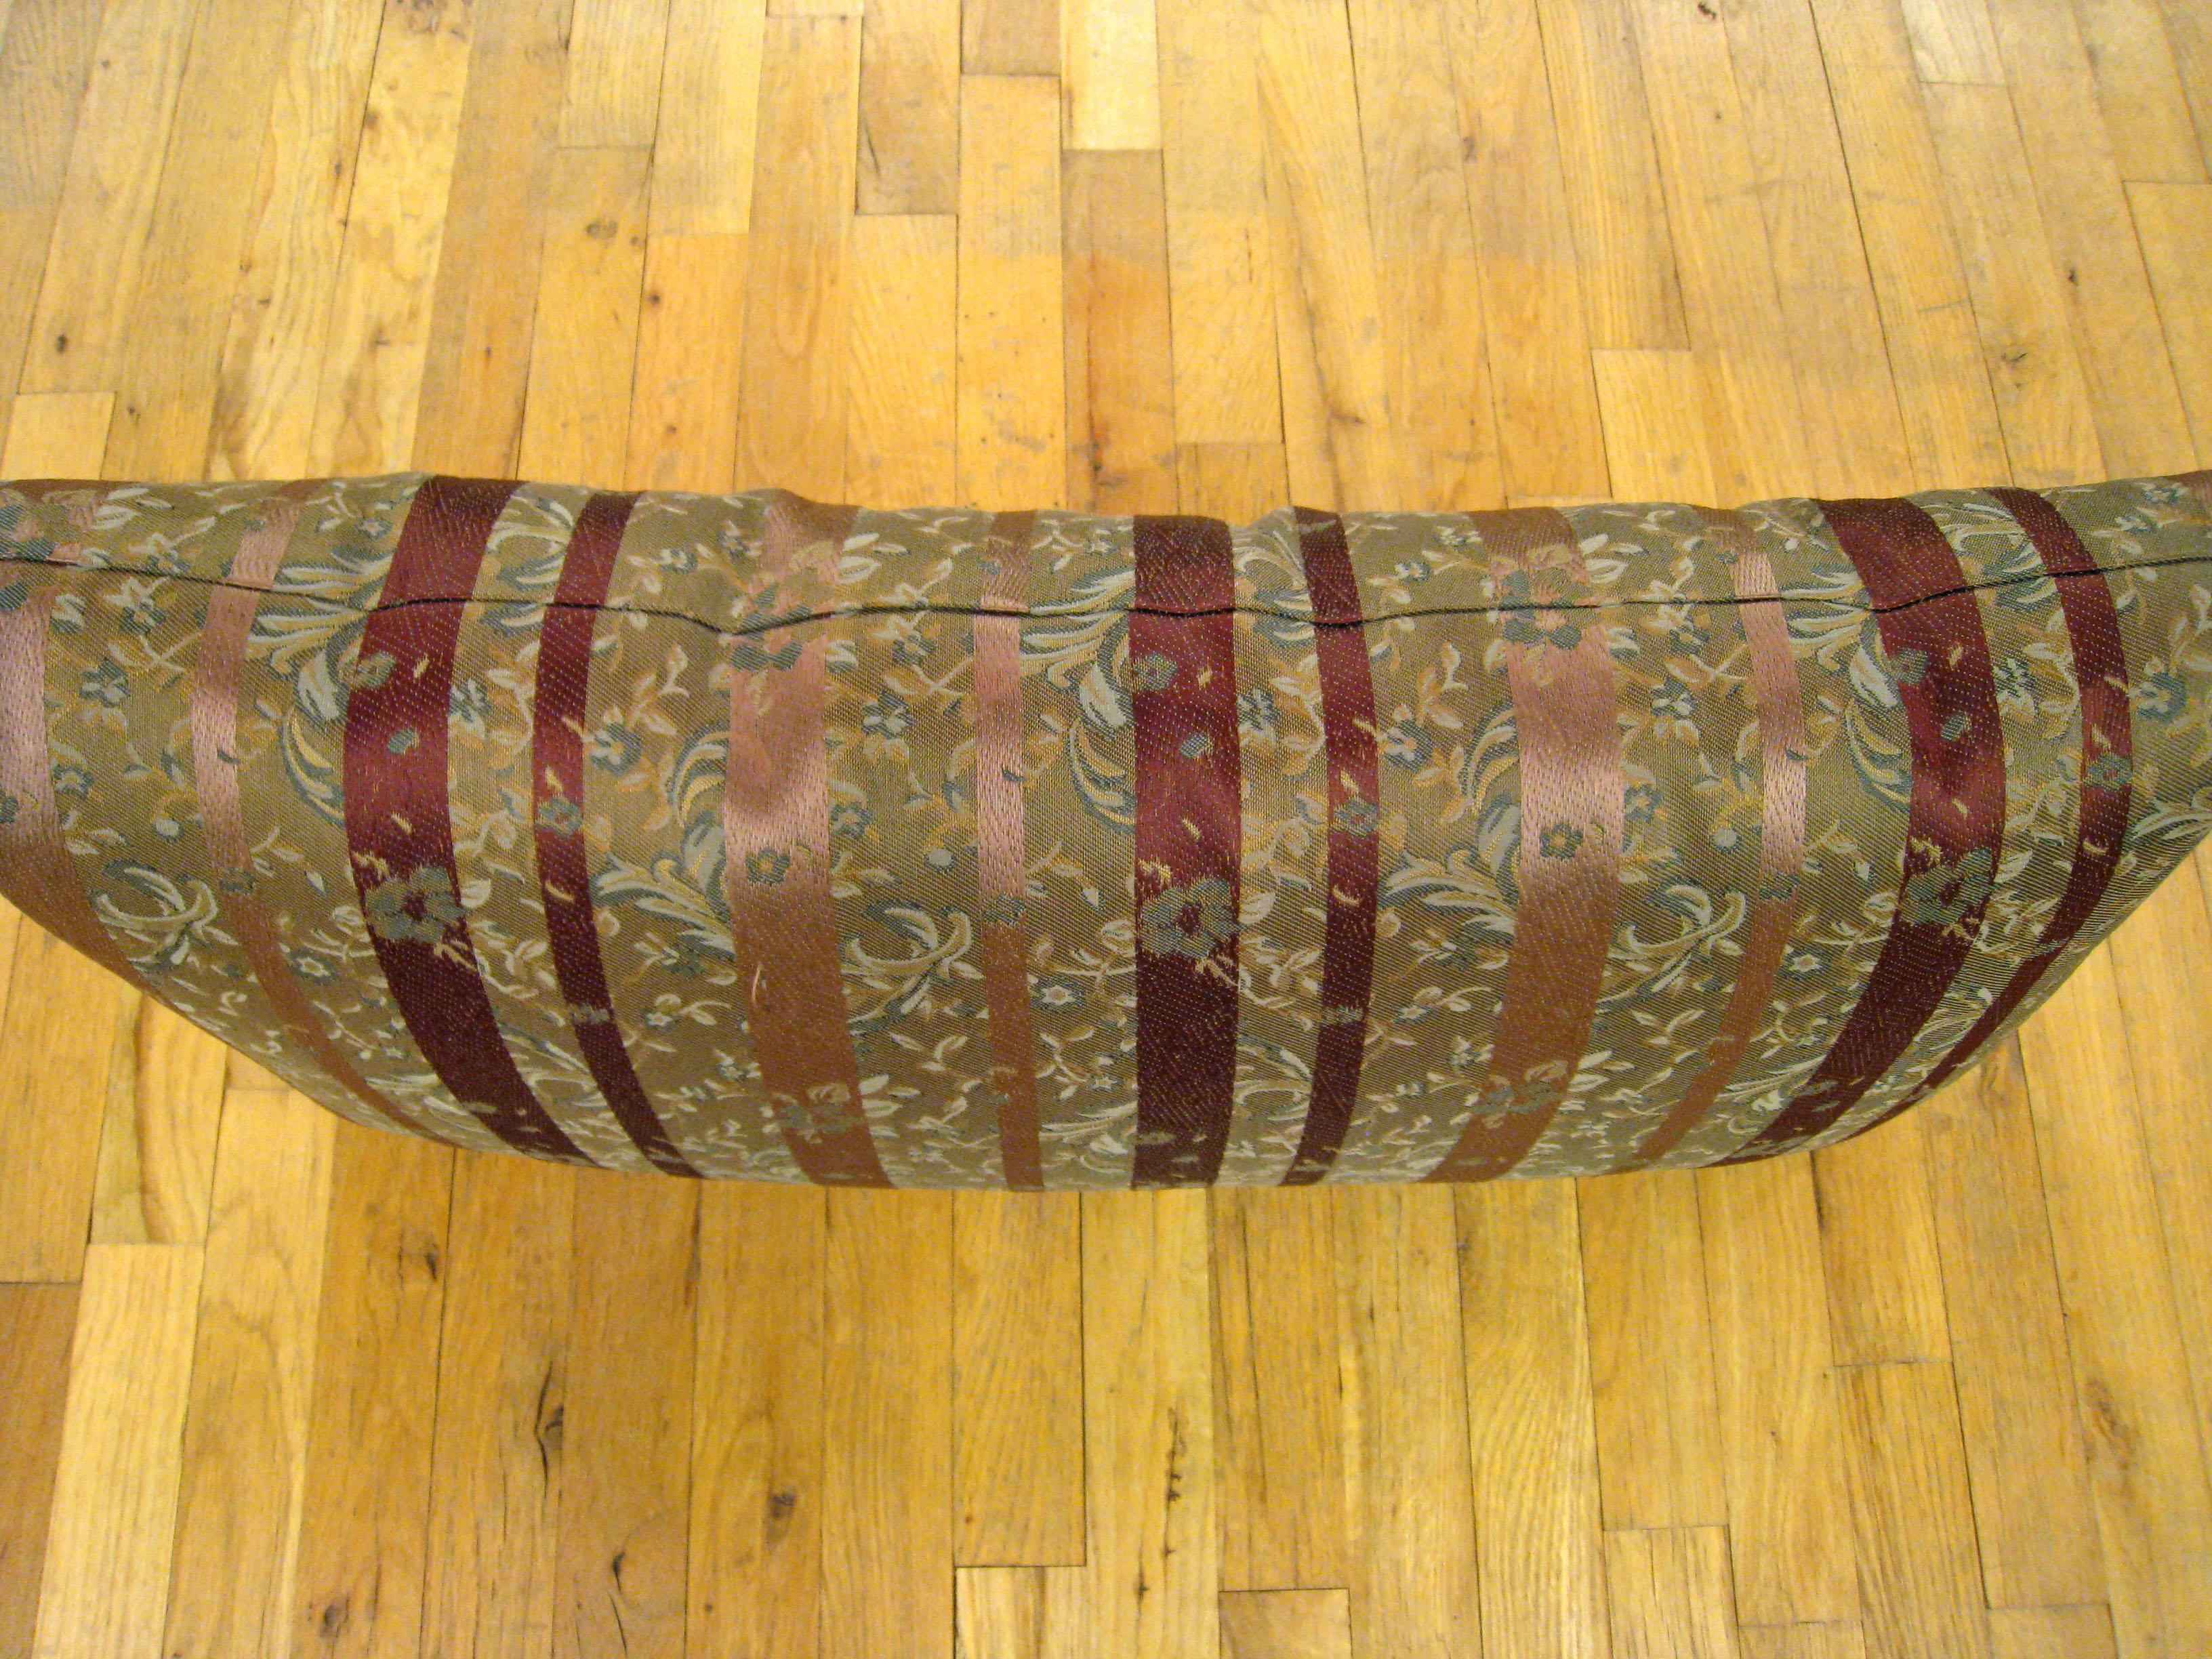 Pair of Large Decorative Satin Pillows w/ Vintage Striped Brocade on Both Sides For Sale 3